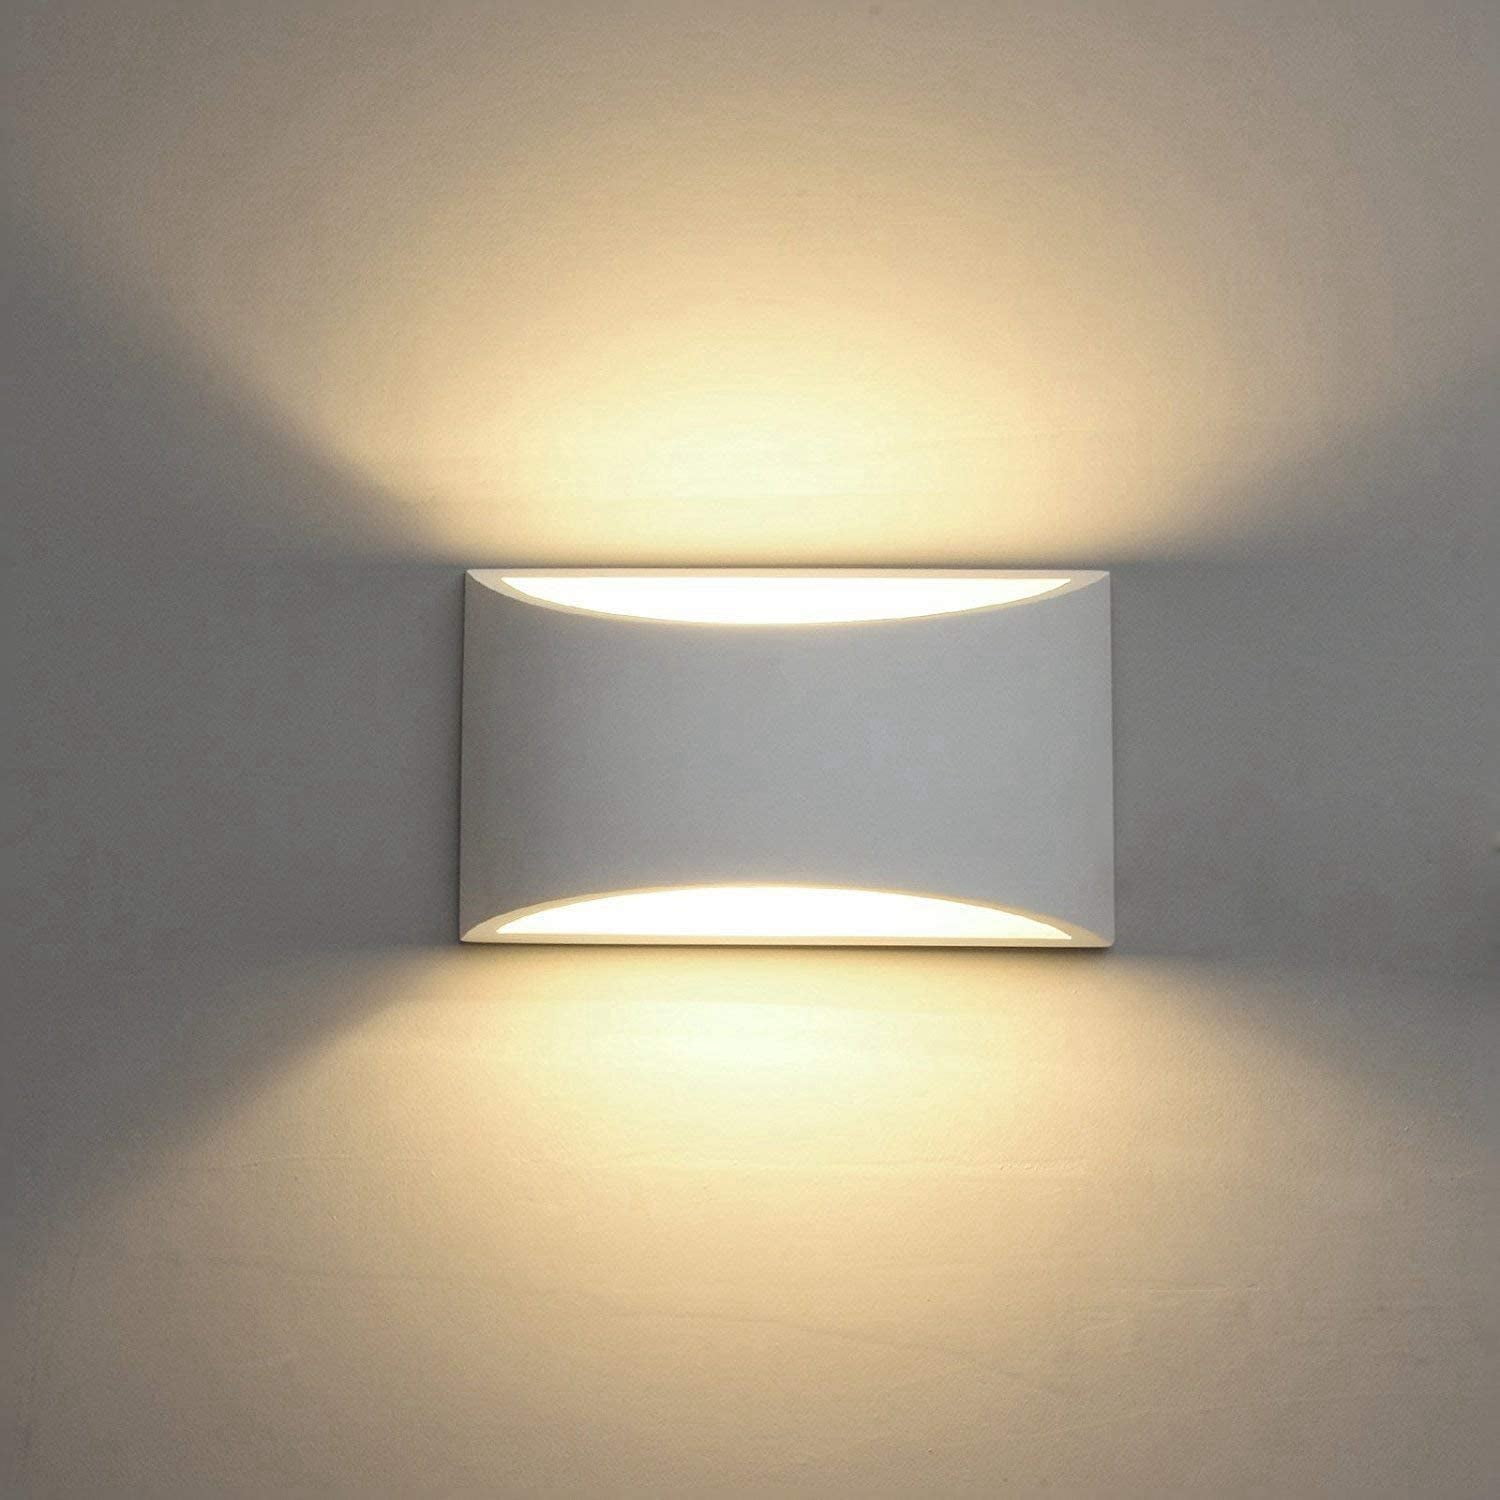 Dimmable/N 3W LED Wall Fixture Light Up/Down Lamp Surface/Flush Mounted Bedroom 